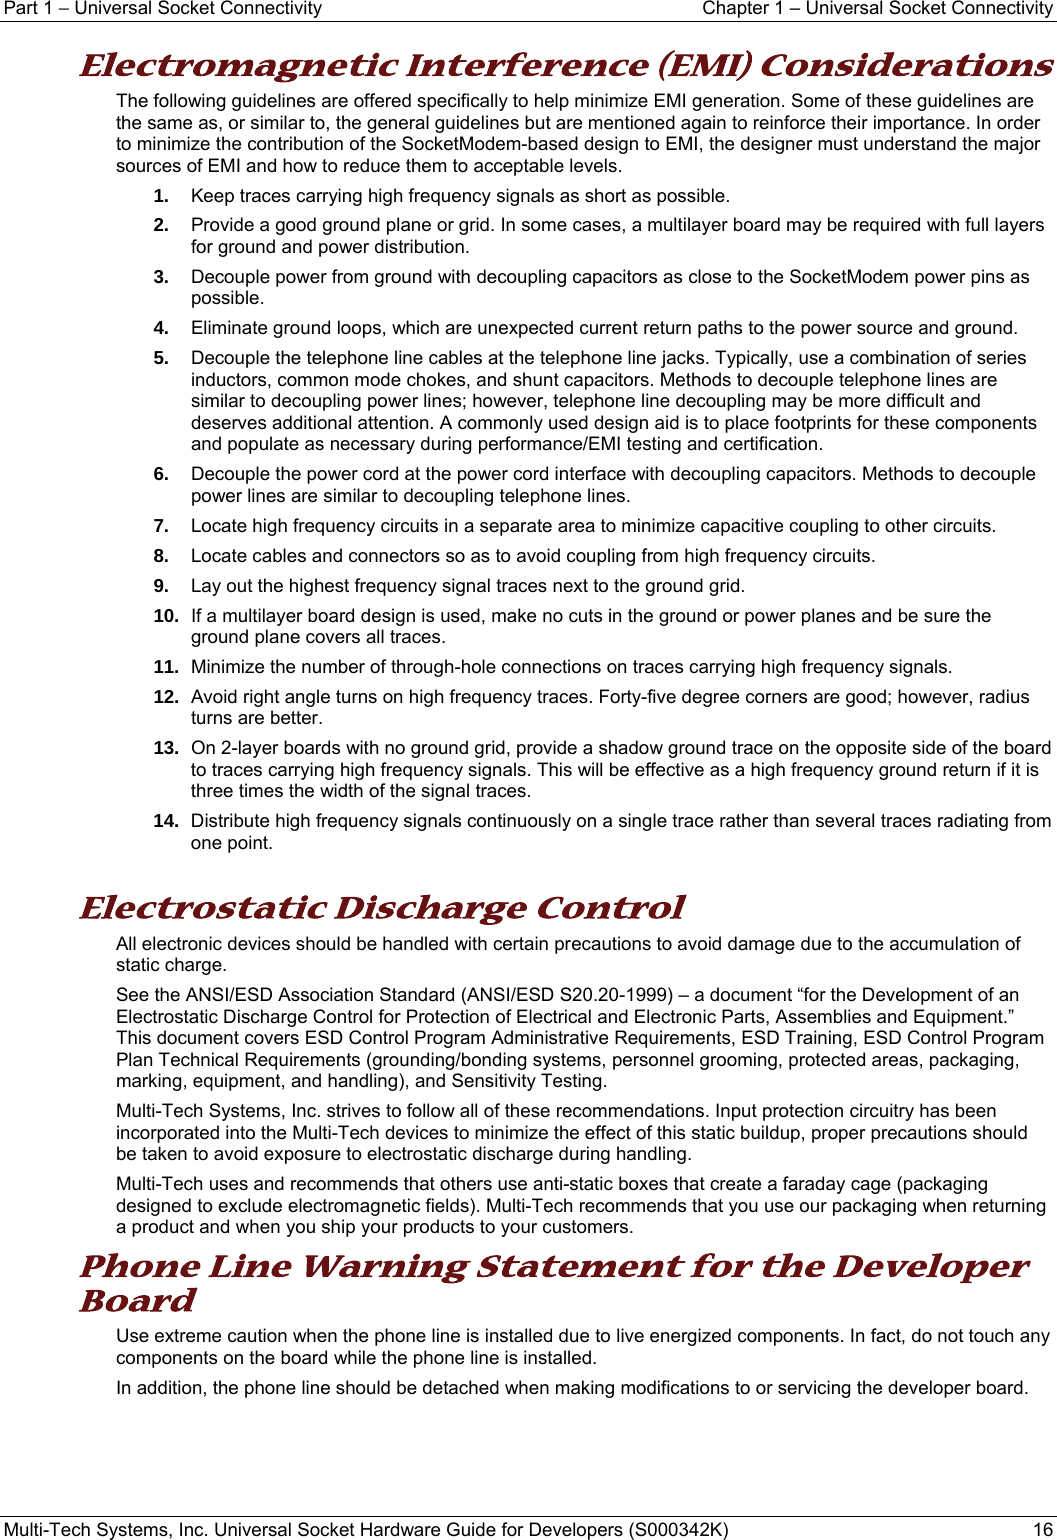 Part 1 − Universal Socket Connectivity    Chapter 1 – Universal Socket Connectivity Multi-Tech Systems, Inc. Universal Socket Hardware Guide for Developers (S000342K)  16  Electromagnetic Interference (EMI) Considerations The following guidelines are offered specifically to help minimize EMI generation. Some of these guidelines are the same as, or similar to, the general guidelines but are mentioned again to reinforce their importance. In order to minimize the contribution of the SocketModem-based design to EMI, the designer must understand the major sources of EMI and how to reduce them to acceptable levels.  1.  Keep traces carrying high frequency signals as short as possible. 2.  Provide a good ground plane or grid. In some cases, a multilayer board may be required with full layers for ground and power distribution. 3.  Decouple power from ground with decoupling capacitors as close to the SocketModem power pins as possible. 4.  Eliminate ground loops, which are unexpected current return paths to the power source and ground. 5.  Decouple the telephone line cables at the telephone line jacks. Typically, use a combination of series inductors, common mode chokes, and shunt capacitors. Methods to decouple telephone lines are similar to decoupling power lines; however, telephone line decoupling may be more difficult and deserves additional attention. A commonly used design aid is to place footprints for these components and populate as necessary during performance/EMI testing and certification. 6.  Decouple the power cord at the power cord interface with decoupling capacitors. Methods to decouple power lines are similar to decoupling telephone lines. 7.  Locate high frequency circuits in a separate area to minimize capacitive coupling to other circuits. 8.  Locate cables and connectors so as to avoid coupling from high frequency circuits. 9.  Lay out the highest frequency signal traces next to the ground grid. 10.  If a multilayer board design is used, make no cuts in the ground or power planes and be sure the ground plane covers all traces. 11.  Minimize the number of through-hole connections on traces carrying high frequency signals. 12.  Avoid right angle turns on high frequency traces. Forty-five degree corners are good; however, radius turns are better. 13.  On 2-layer boards with no ground grid, provide a shadow ground trace on the opposite side of the board to traces carrying high frequency signals. This will be effective as a high frequency ground return if it is three times the width of the signal traces. 14.  Distribute high frequency signals continuously on a single trace rather than several traces radiating from one point.  Electrostatic Discharge Control All electronic devices should be handled with certain precautions to avoid damage due to the accumulation of static charge.  See the ANSI/ESD Association Standard (ANSI/ESD S20.20-1999) – a document “for the Development of an Electrostatic Discharge Control for Protection of Electrical and Electronic Parts, Assemblies and Equipment.” This document covers ESD Control Program Administrative Requirements, ESD Training, ESD Control Program Plan Technical Requirements (grounding/bonding systems, personnel grooming, protected areas, packaging, marking, equipment, and handling), and Sensitivity Testing. Multi-Tech Systems, Inc. strives to follow all of these recommendations. Input protection circuitry has been incorporated into the Multi-Tech devices to minimize the effect of this static buildup, proper precautions should be taken to avoid exposure to electrostatic discharge during handling.  Multi-Tech uses and recommends that others use anti-static boxes that create a faraday cage (packaging designed to exclude electromagnetic fields). Multi-Tech recommends that you use our packaging when returning a product and when you ship your products to your customers. Phone Line Warning Statement for the Developer Board Use extreme caution when the phone line is installed due to live energized components. In fact, do not touch any components on the board while the phone line is installed.  In addition, the phone line should be detached when making modifications to or servicing the developer board.    